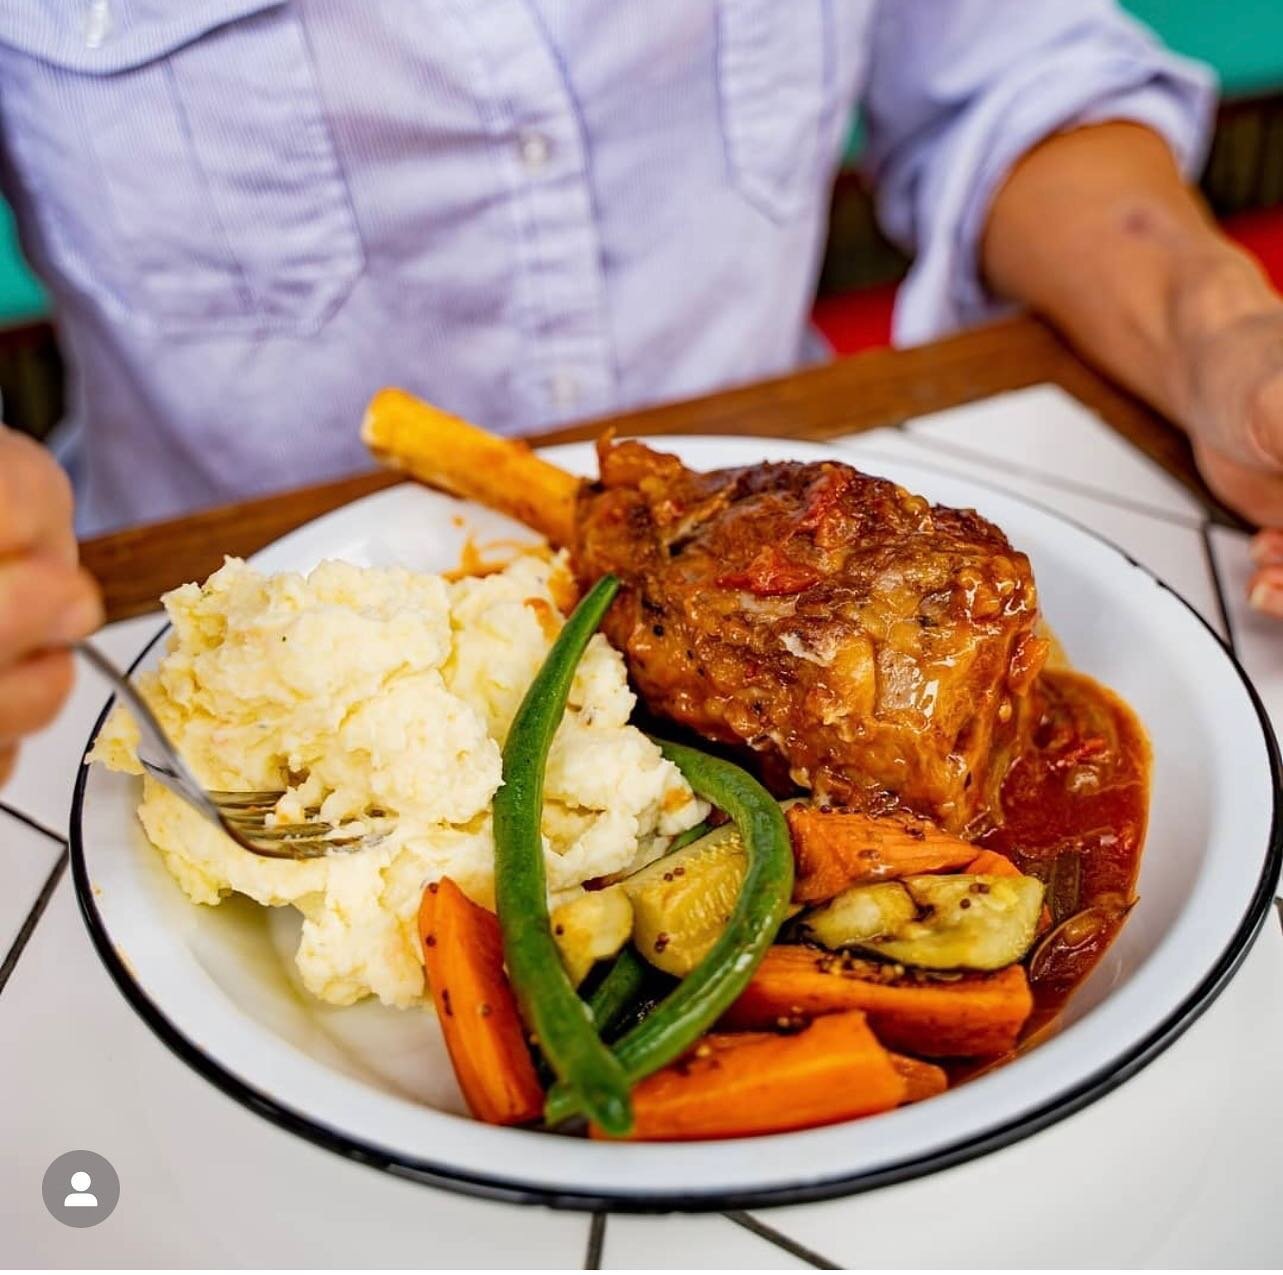 Why shanks very much - don't mind if we do!!
Fall-off-the-bone slow cooked lamb shank served with mash. Yes please!!
Friday from 4pm Belrose &amp; NewPort. 
.
.
.
.
#lambshanksfordinner #lovefridays❤️ #goodfoodau #goodfoodguide #eatlocal #northernbea